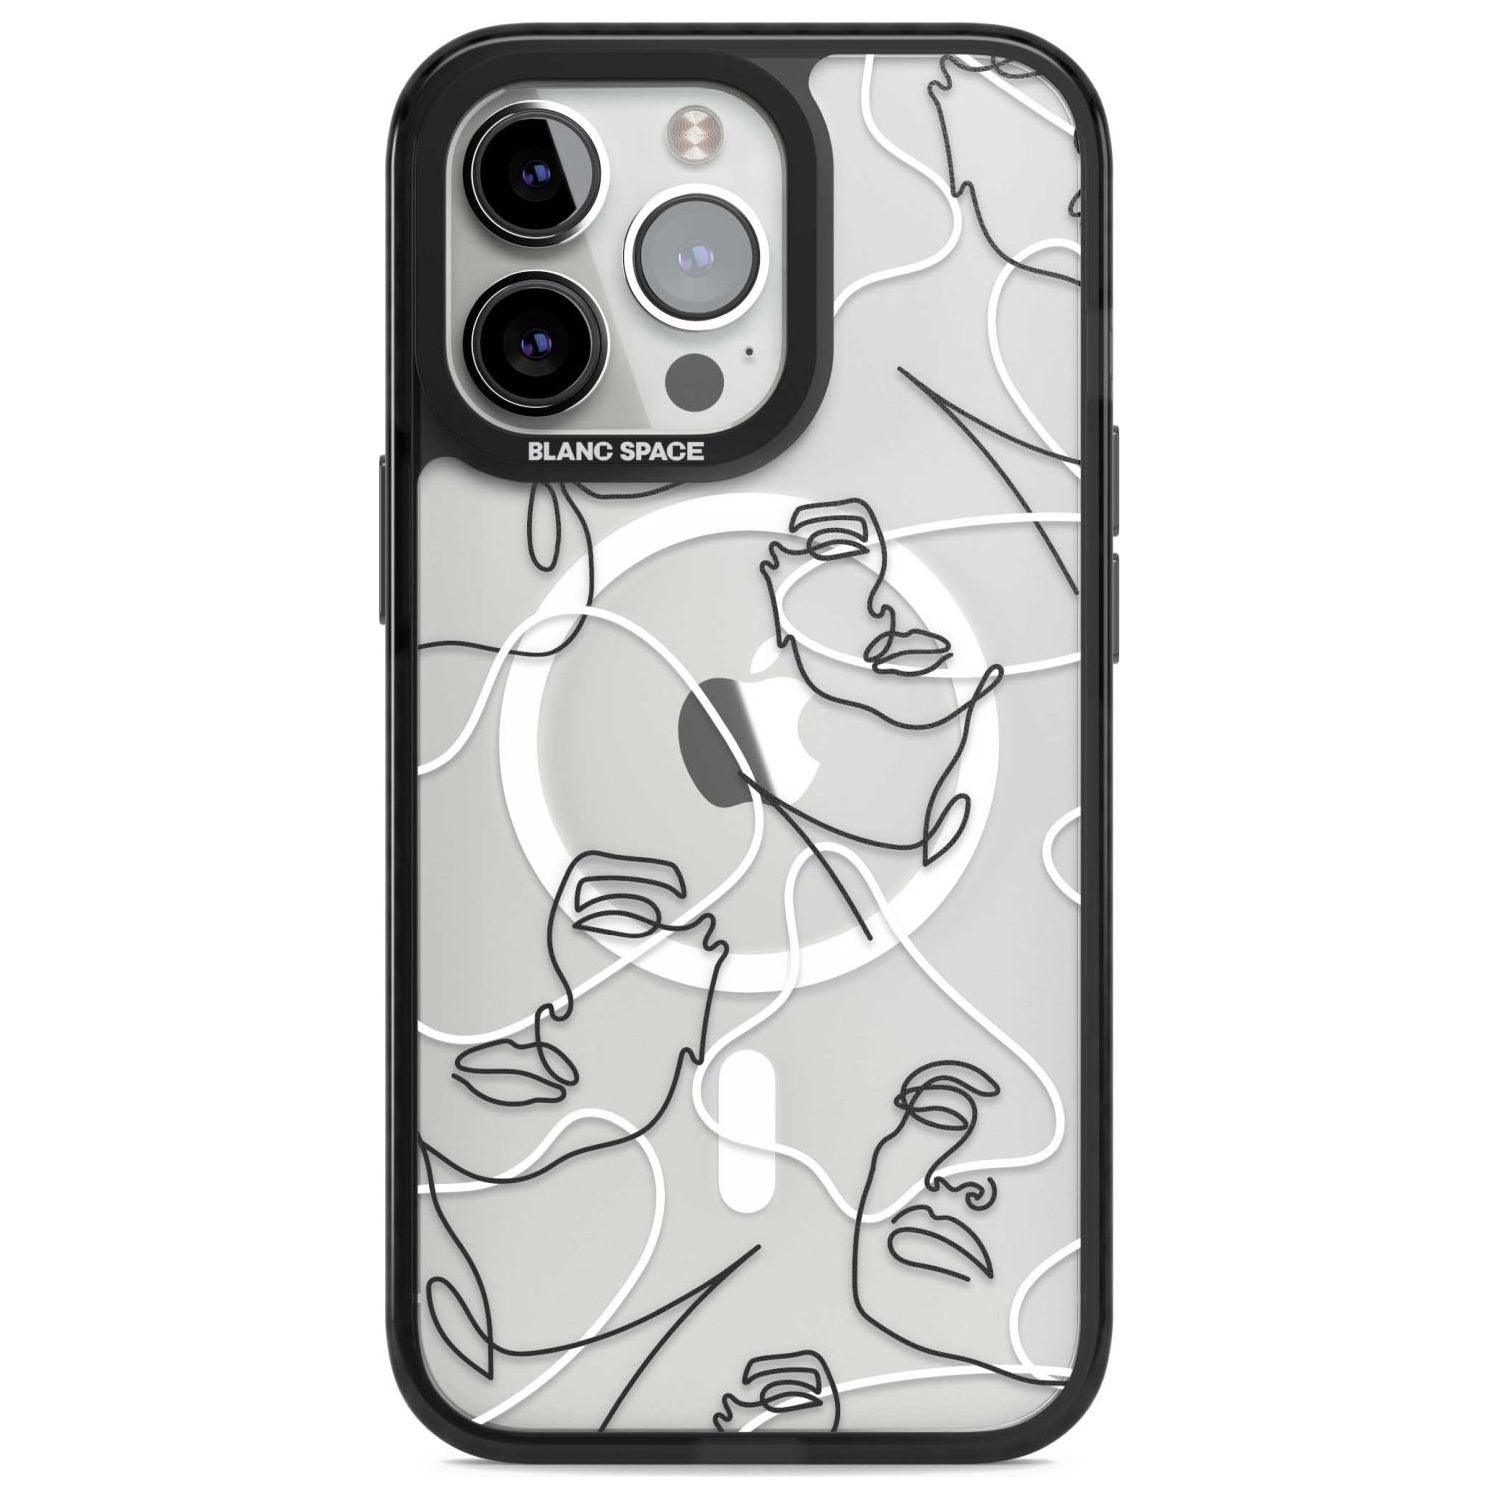 Personalised Abstract Faces Custom Phone Case iPhone 15 Pro Max / Magsafe Black Impact Case,iPhone 15 Pro / Magsafe Black Impact Case,iPhone 14 Pro Max / Magsafe Black Impact Case,iPhone 14 Pro / Magsafe Black Impact Case,iPhone 13 Pro / Magsafe Black Impact Case Blanc Space